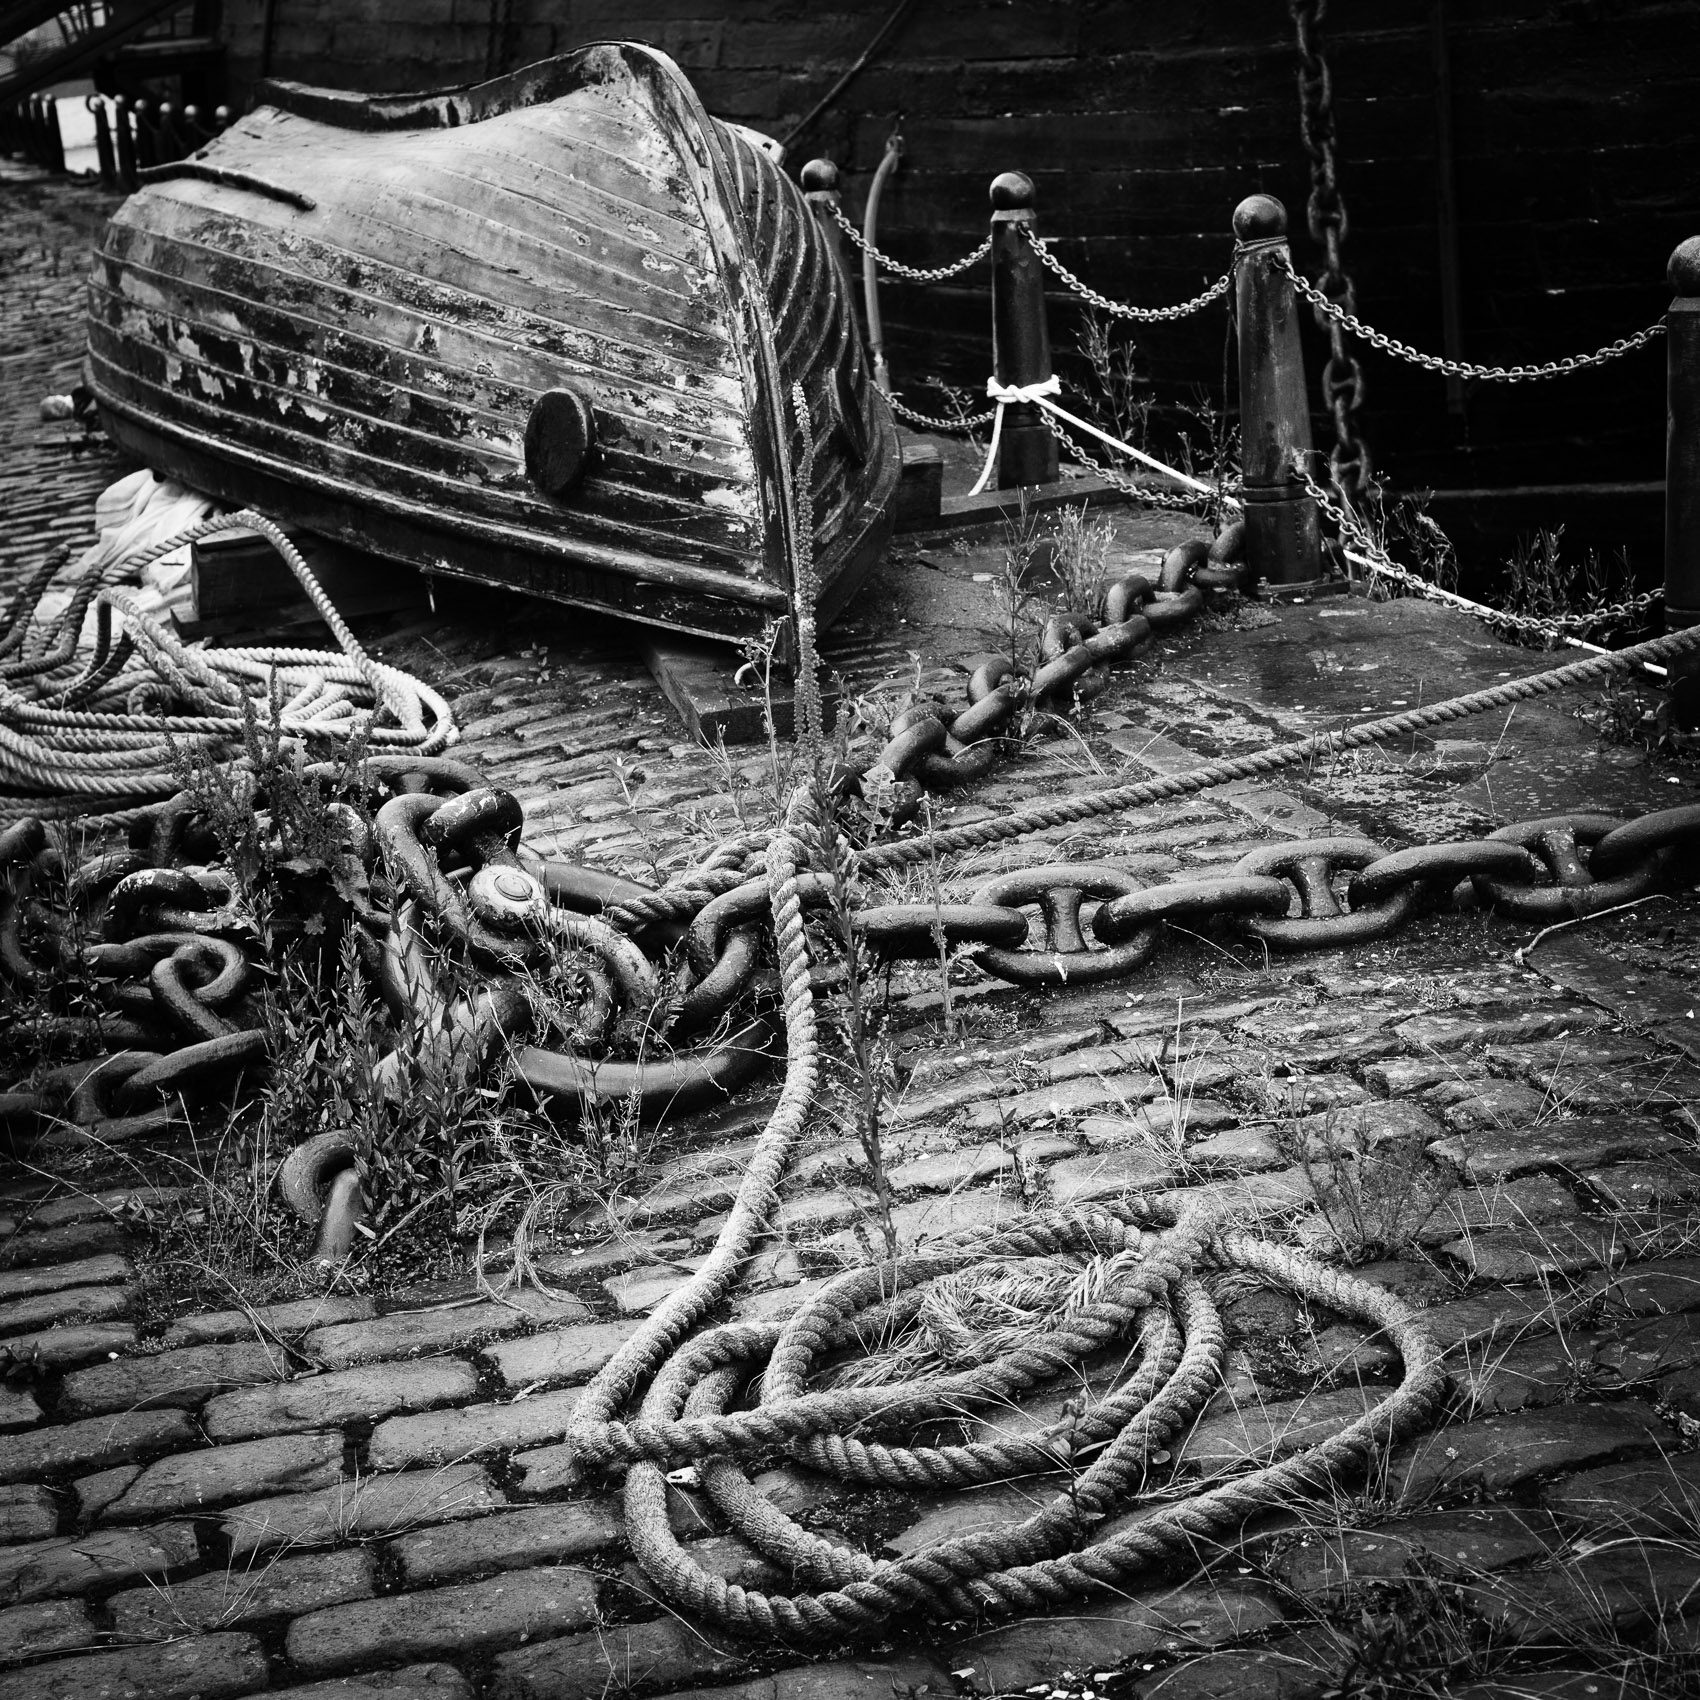 Monochrome (black and white) image of upturned small boat and rope on Victoria Dock, Dundee, Scotland. DD006